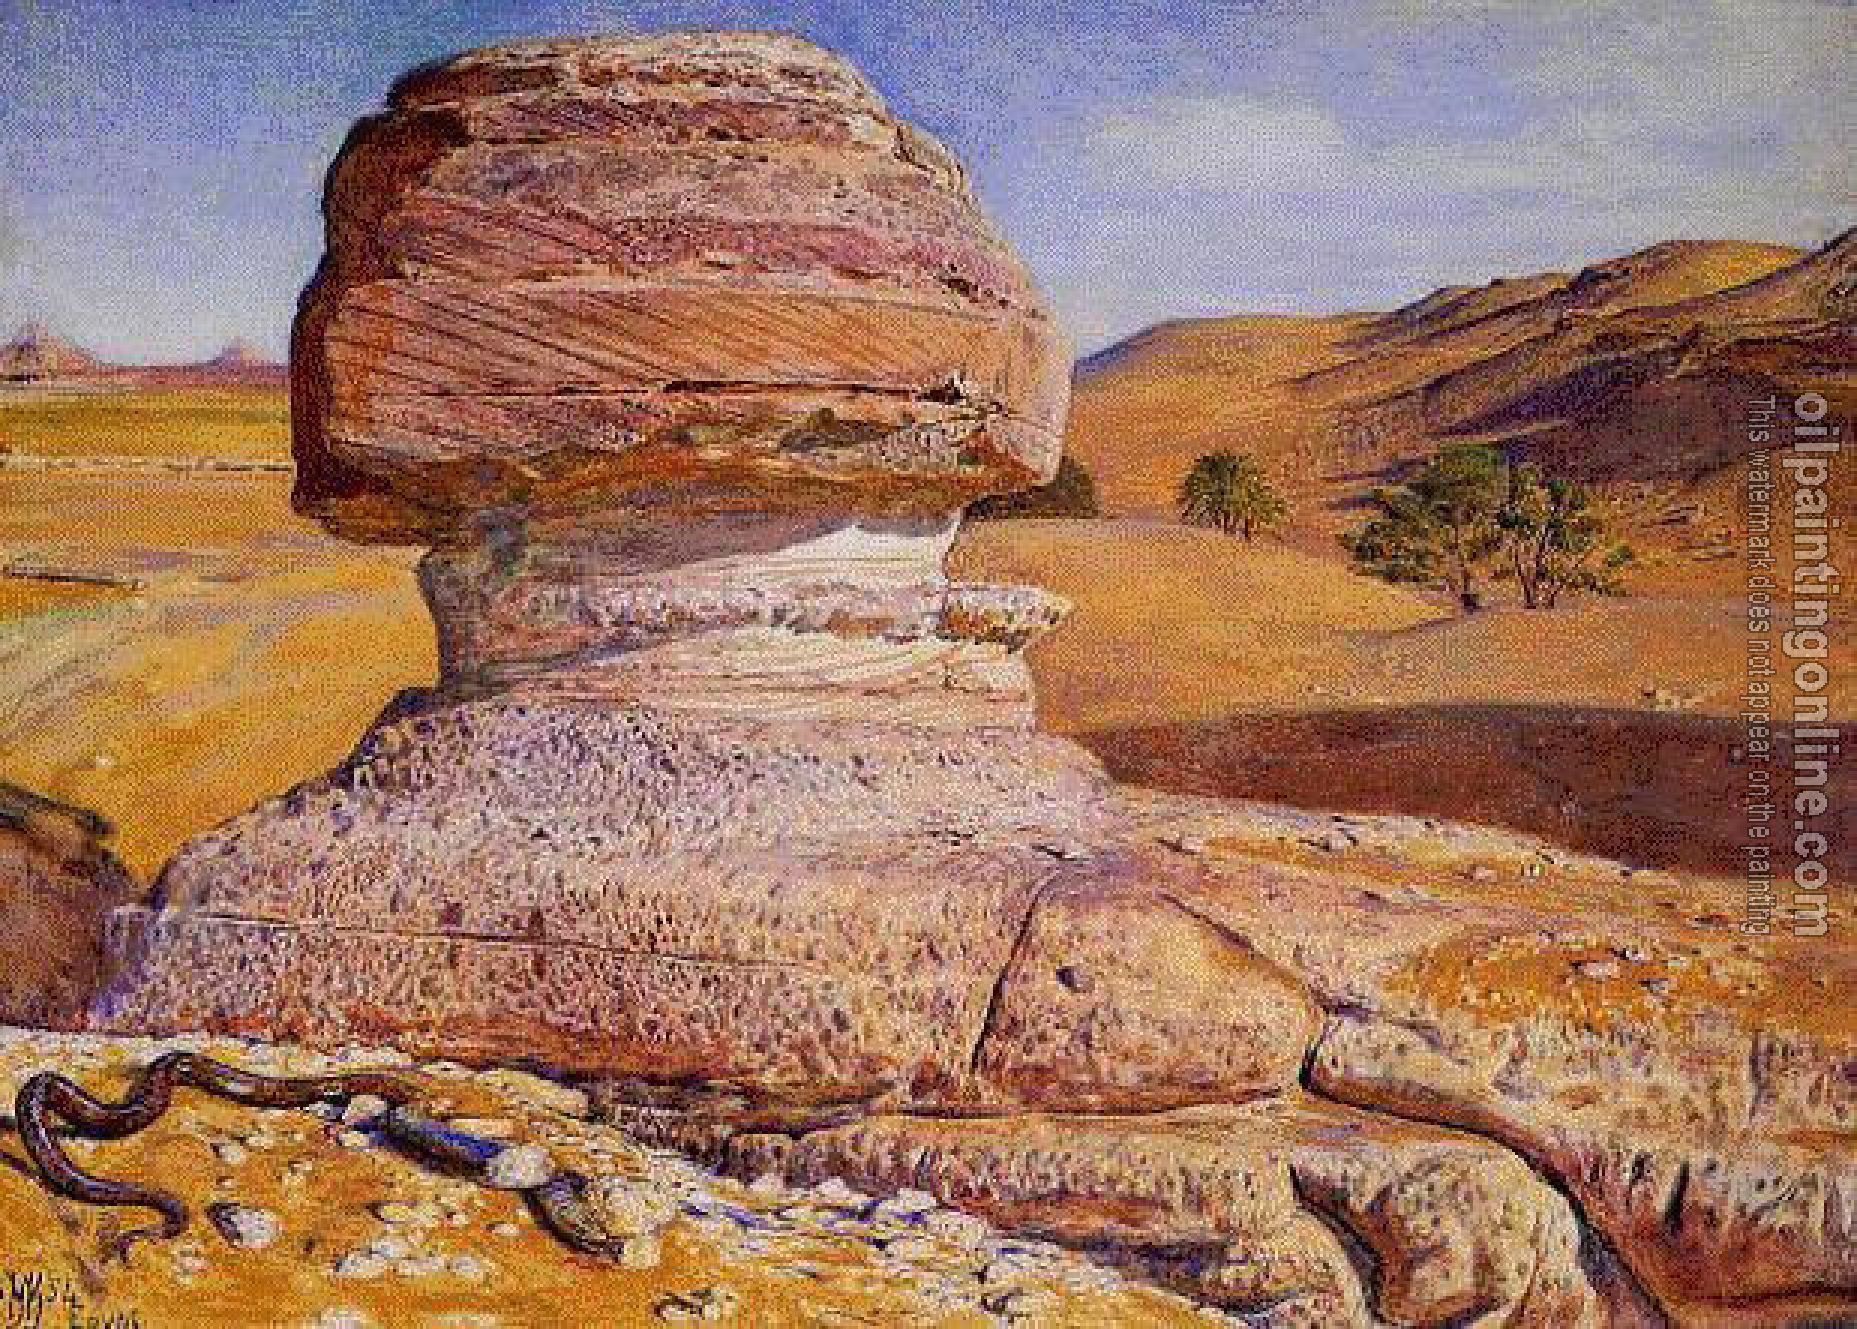 Hunt, William Holman - The Sphinx Gizeh Looking towards the Pyramids of Sakhara